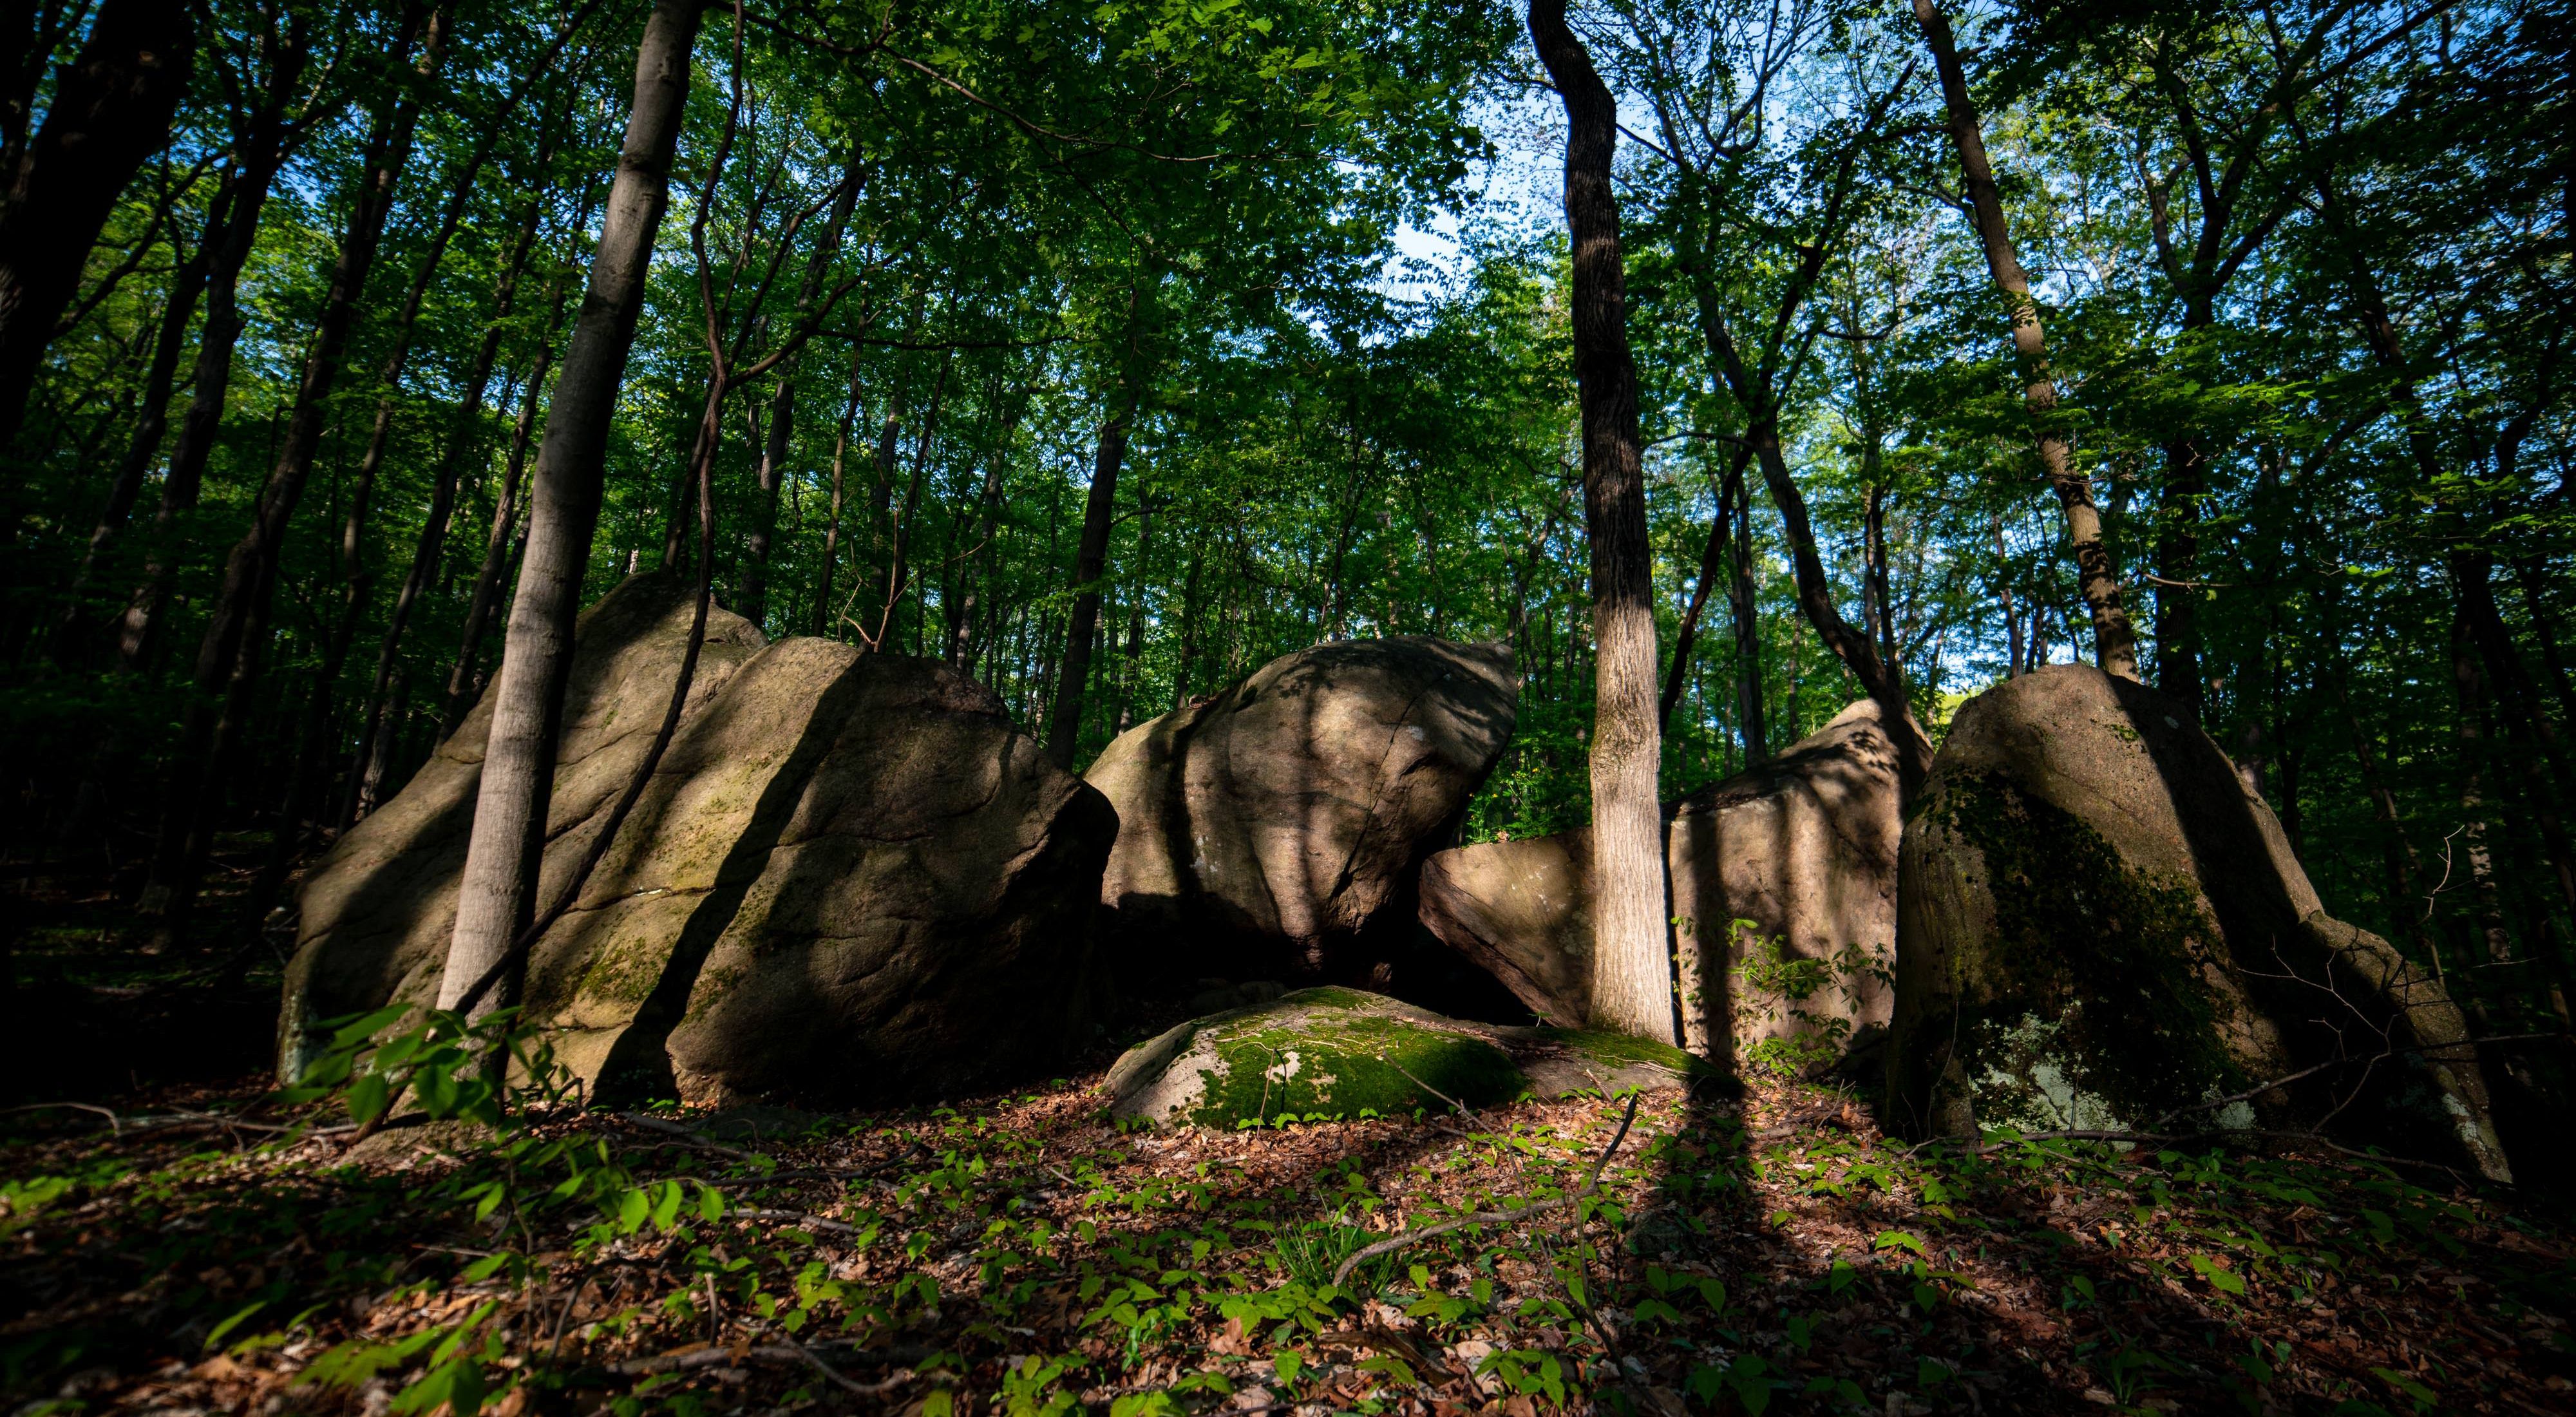 Shadows cast over boulders and a few trees.